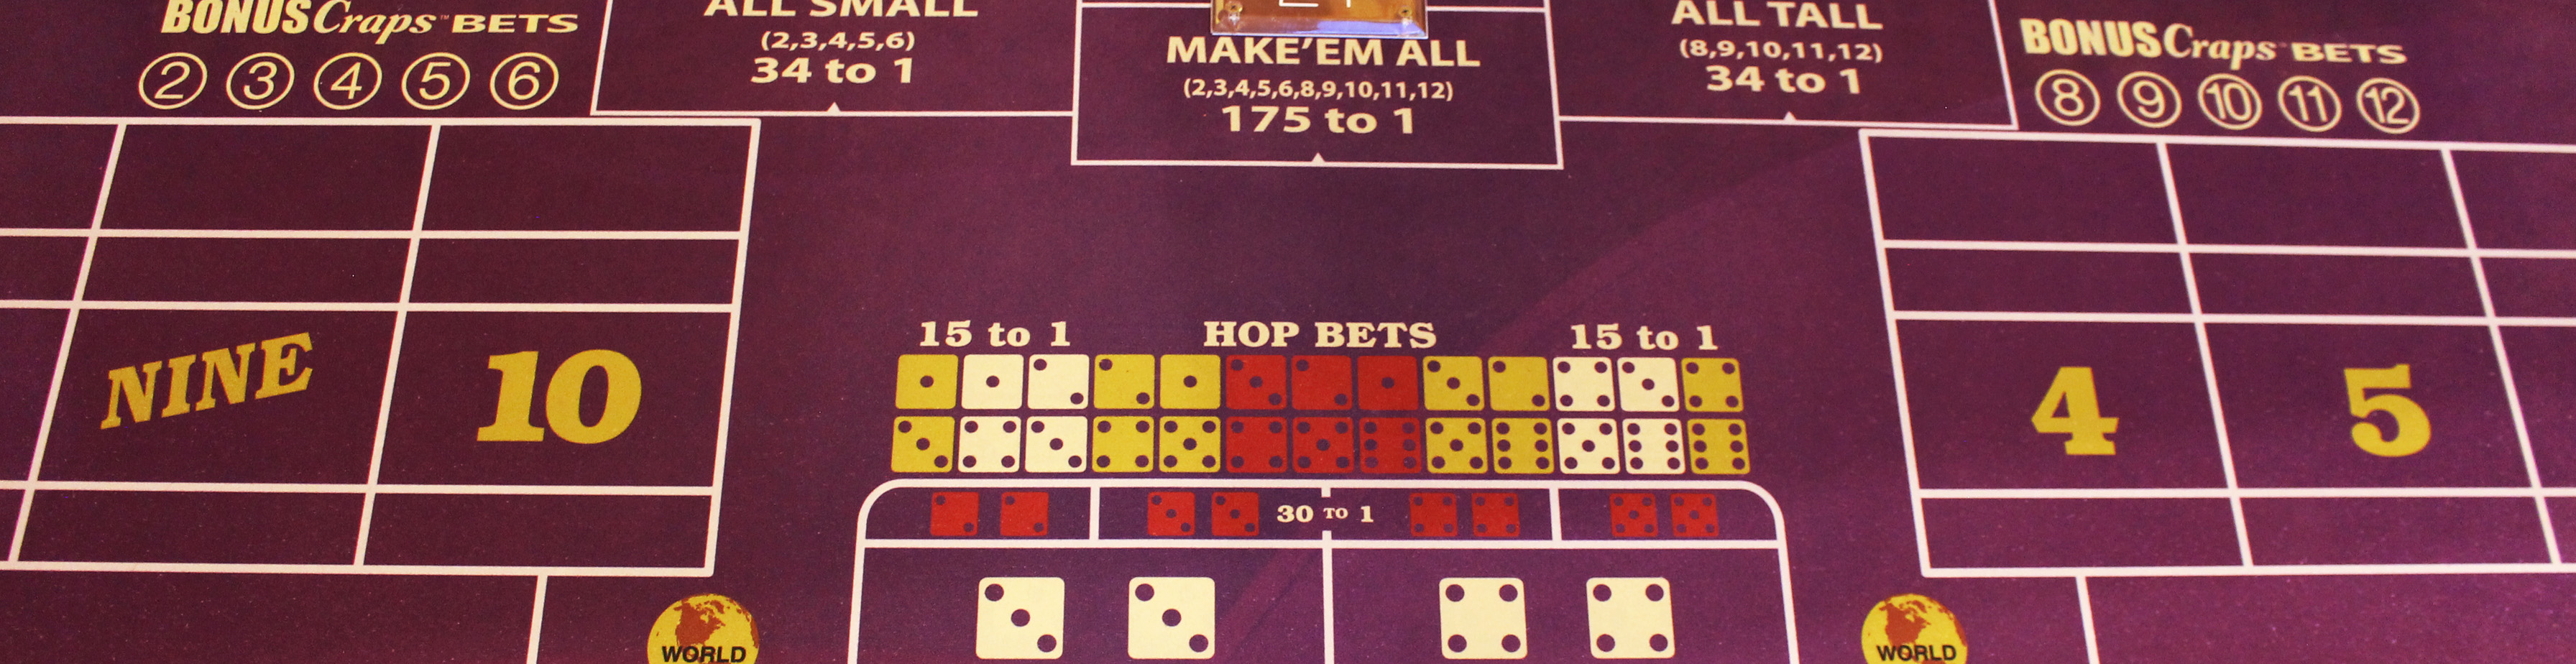 Table Games Layout - Craps